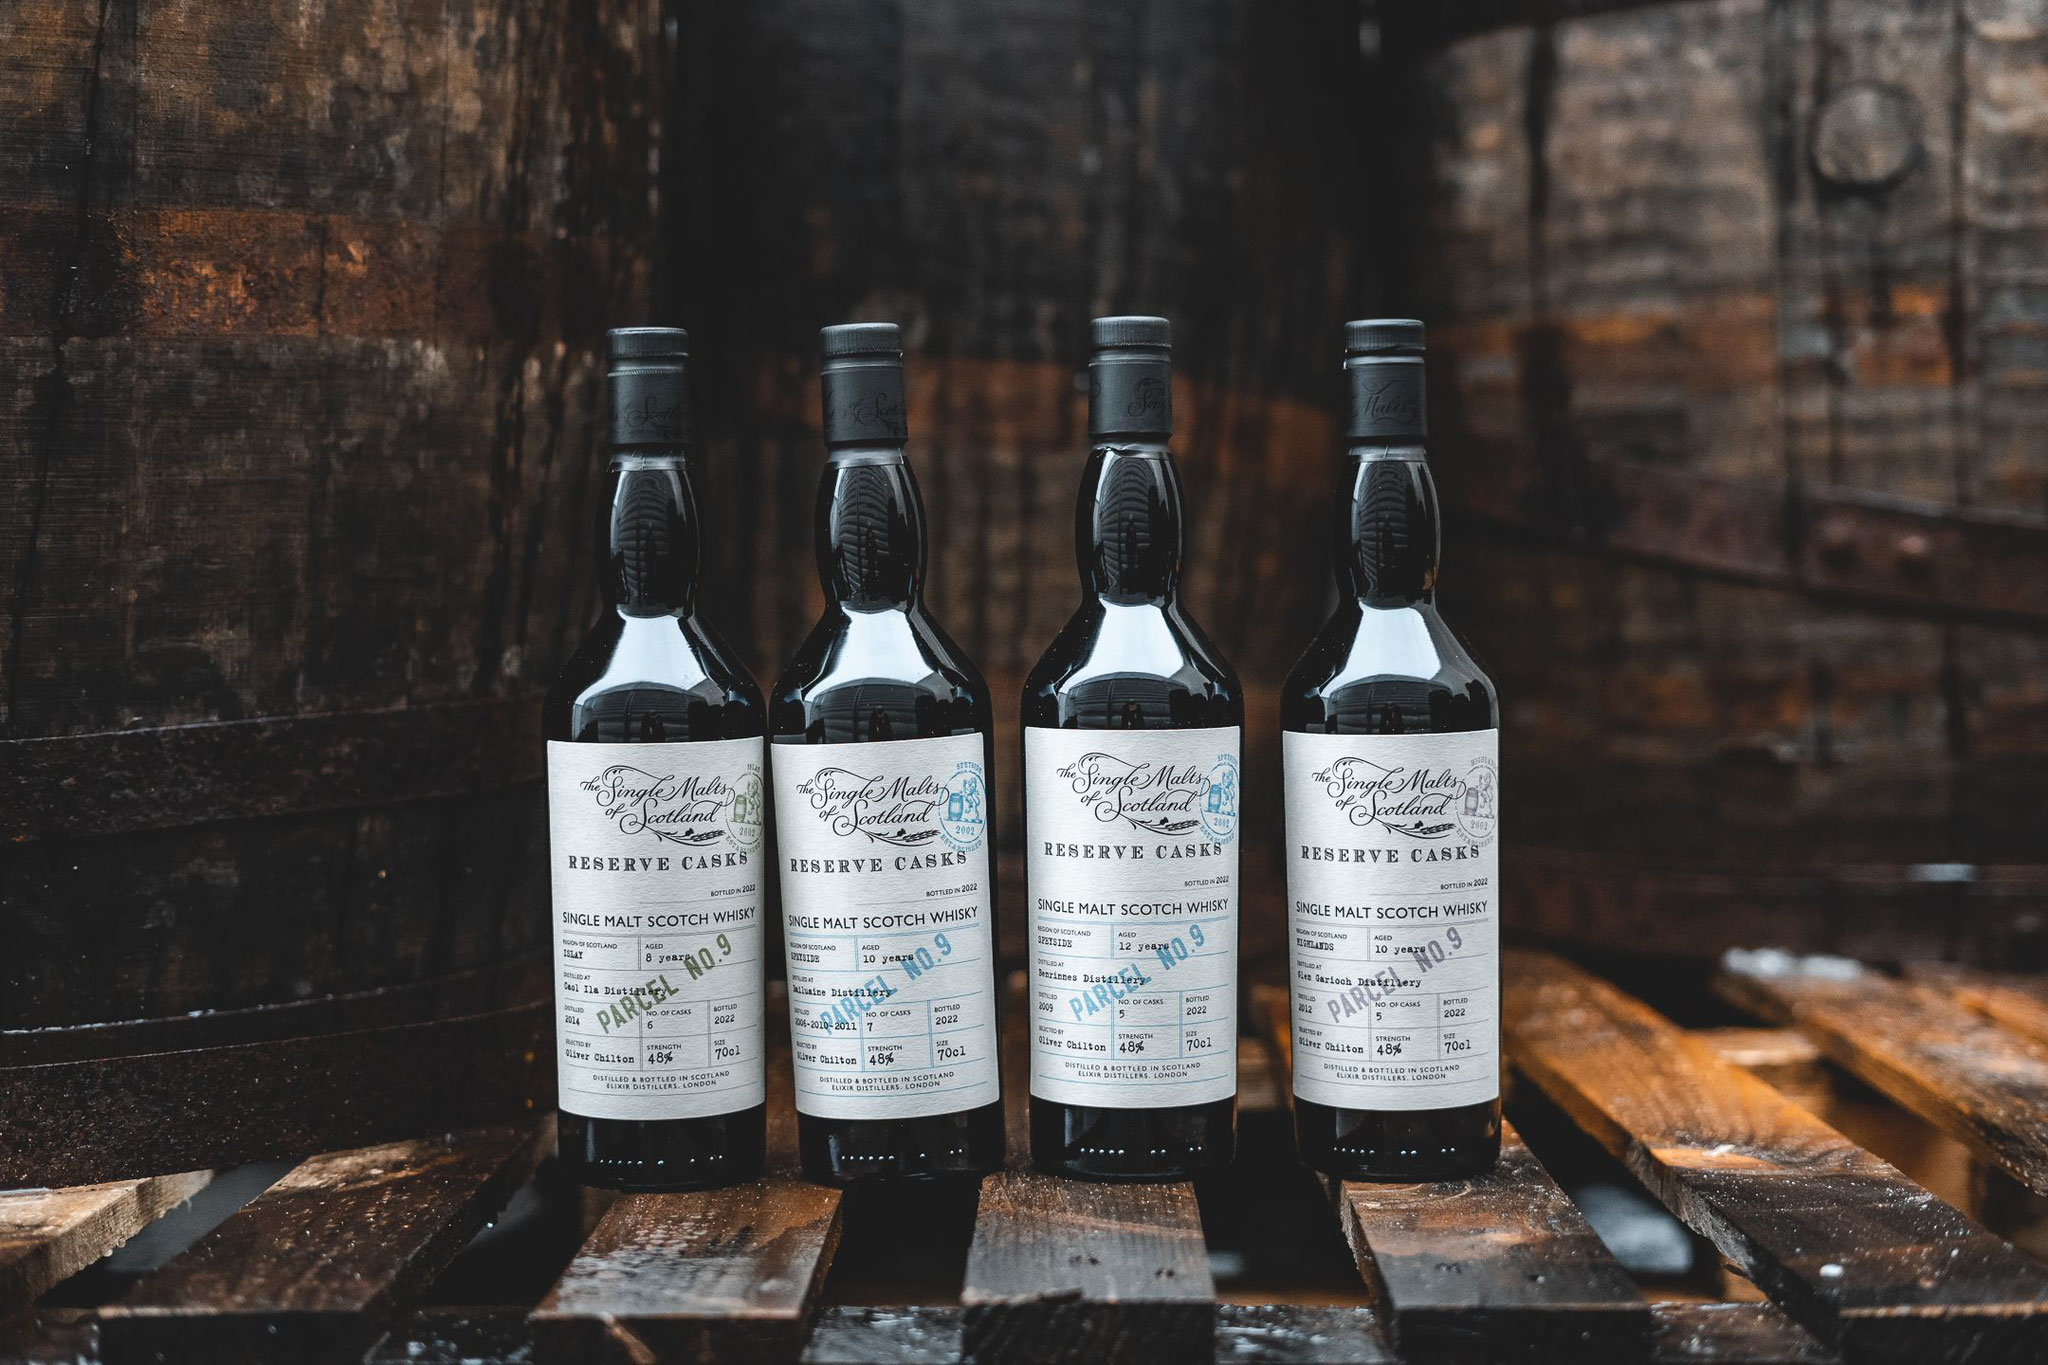 New: The Single Malts of Scotland - Parcel No.9 Collection 